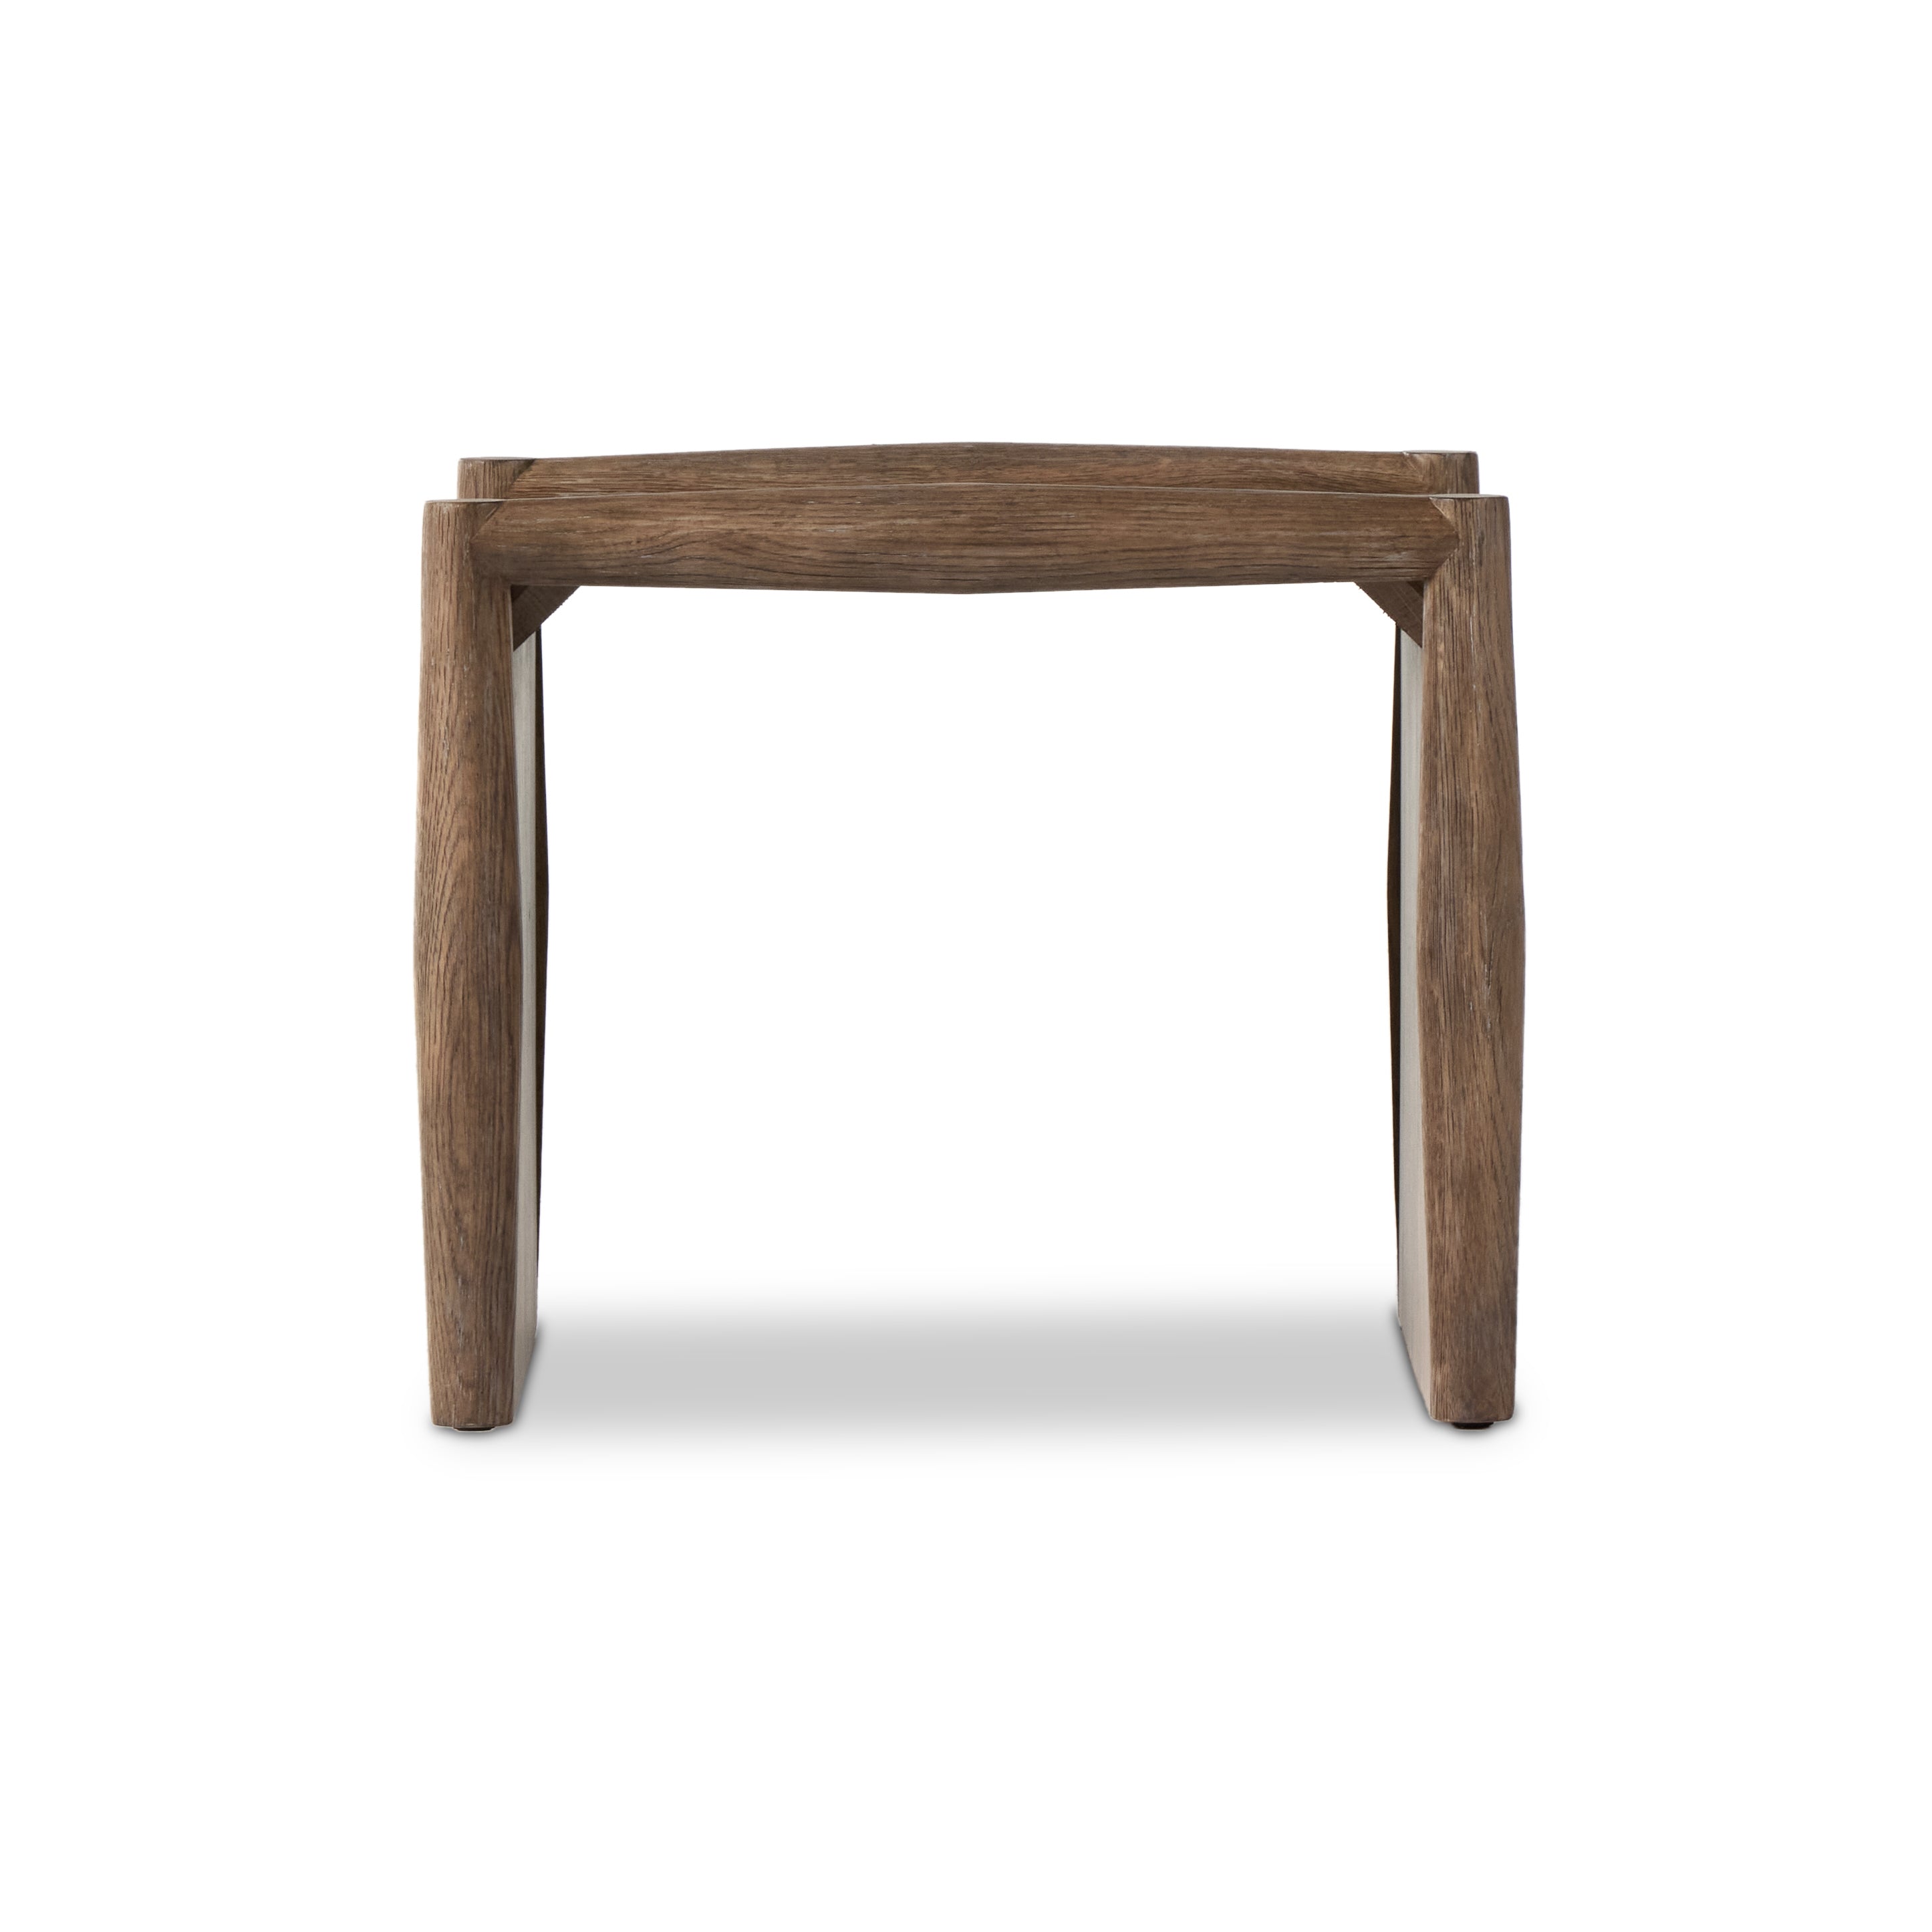 Traditional, reimagined. Made from rustic weathered oak, a simply structured end table brings a streamlined look to the living room. Amethyst Home provides interior design, new construction, custom furniture, and area rugs in the Boston metro area.